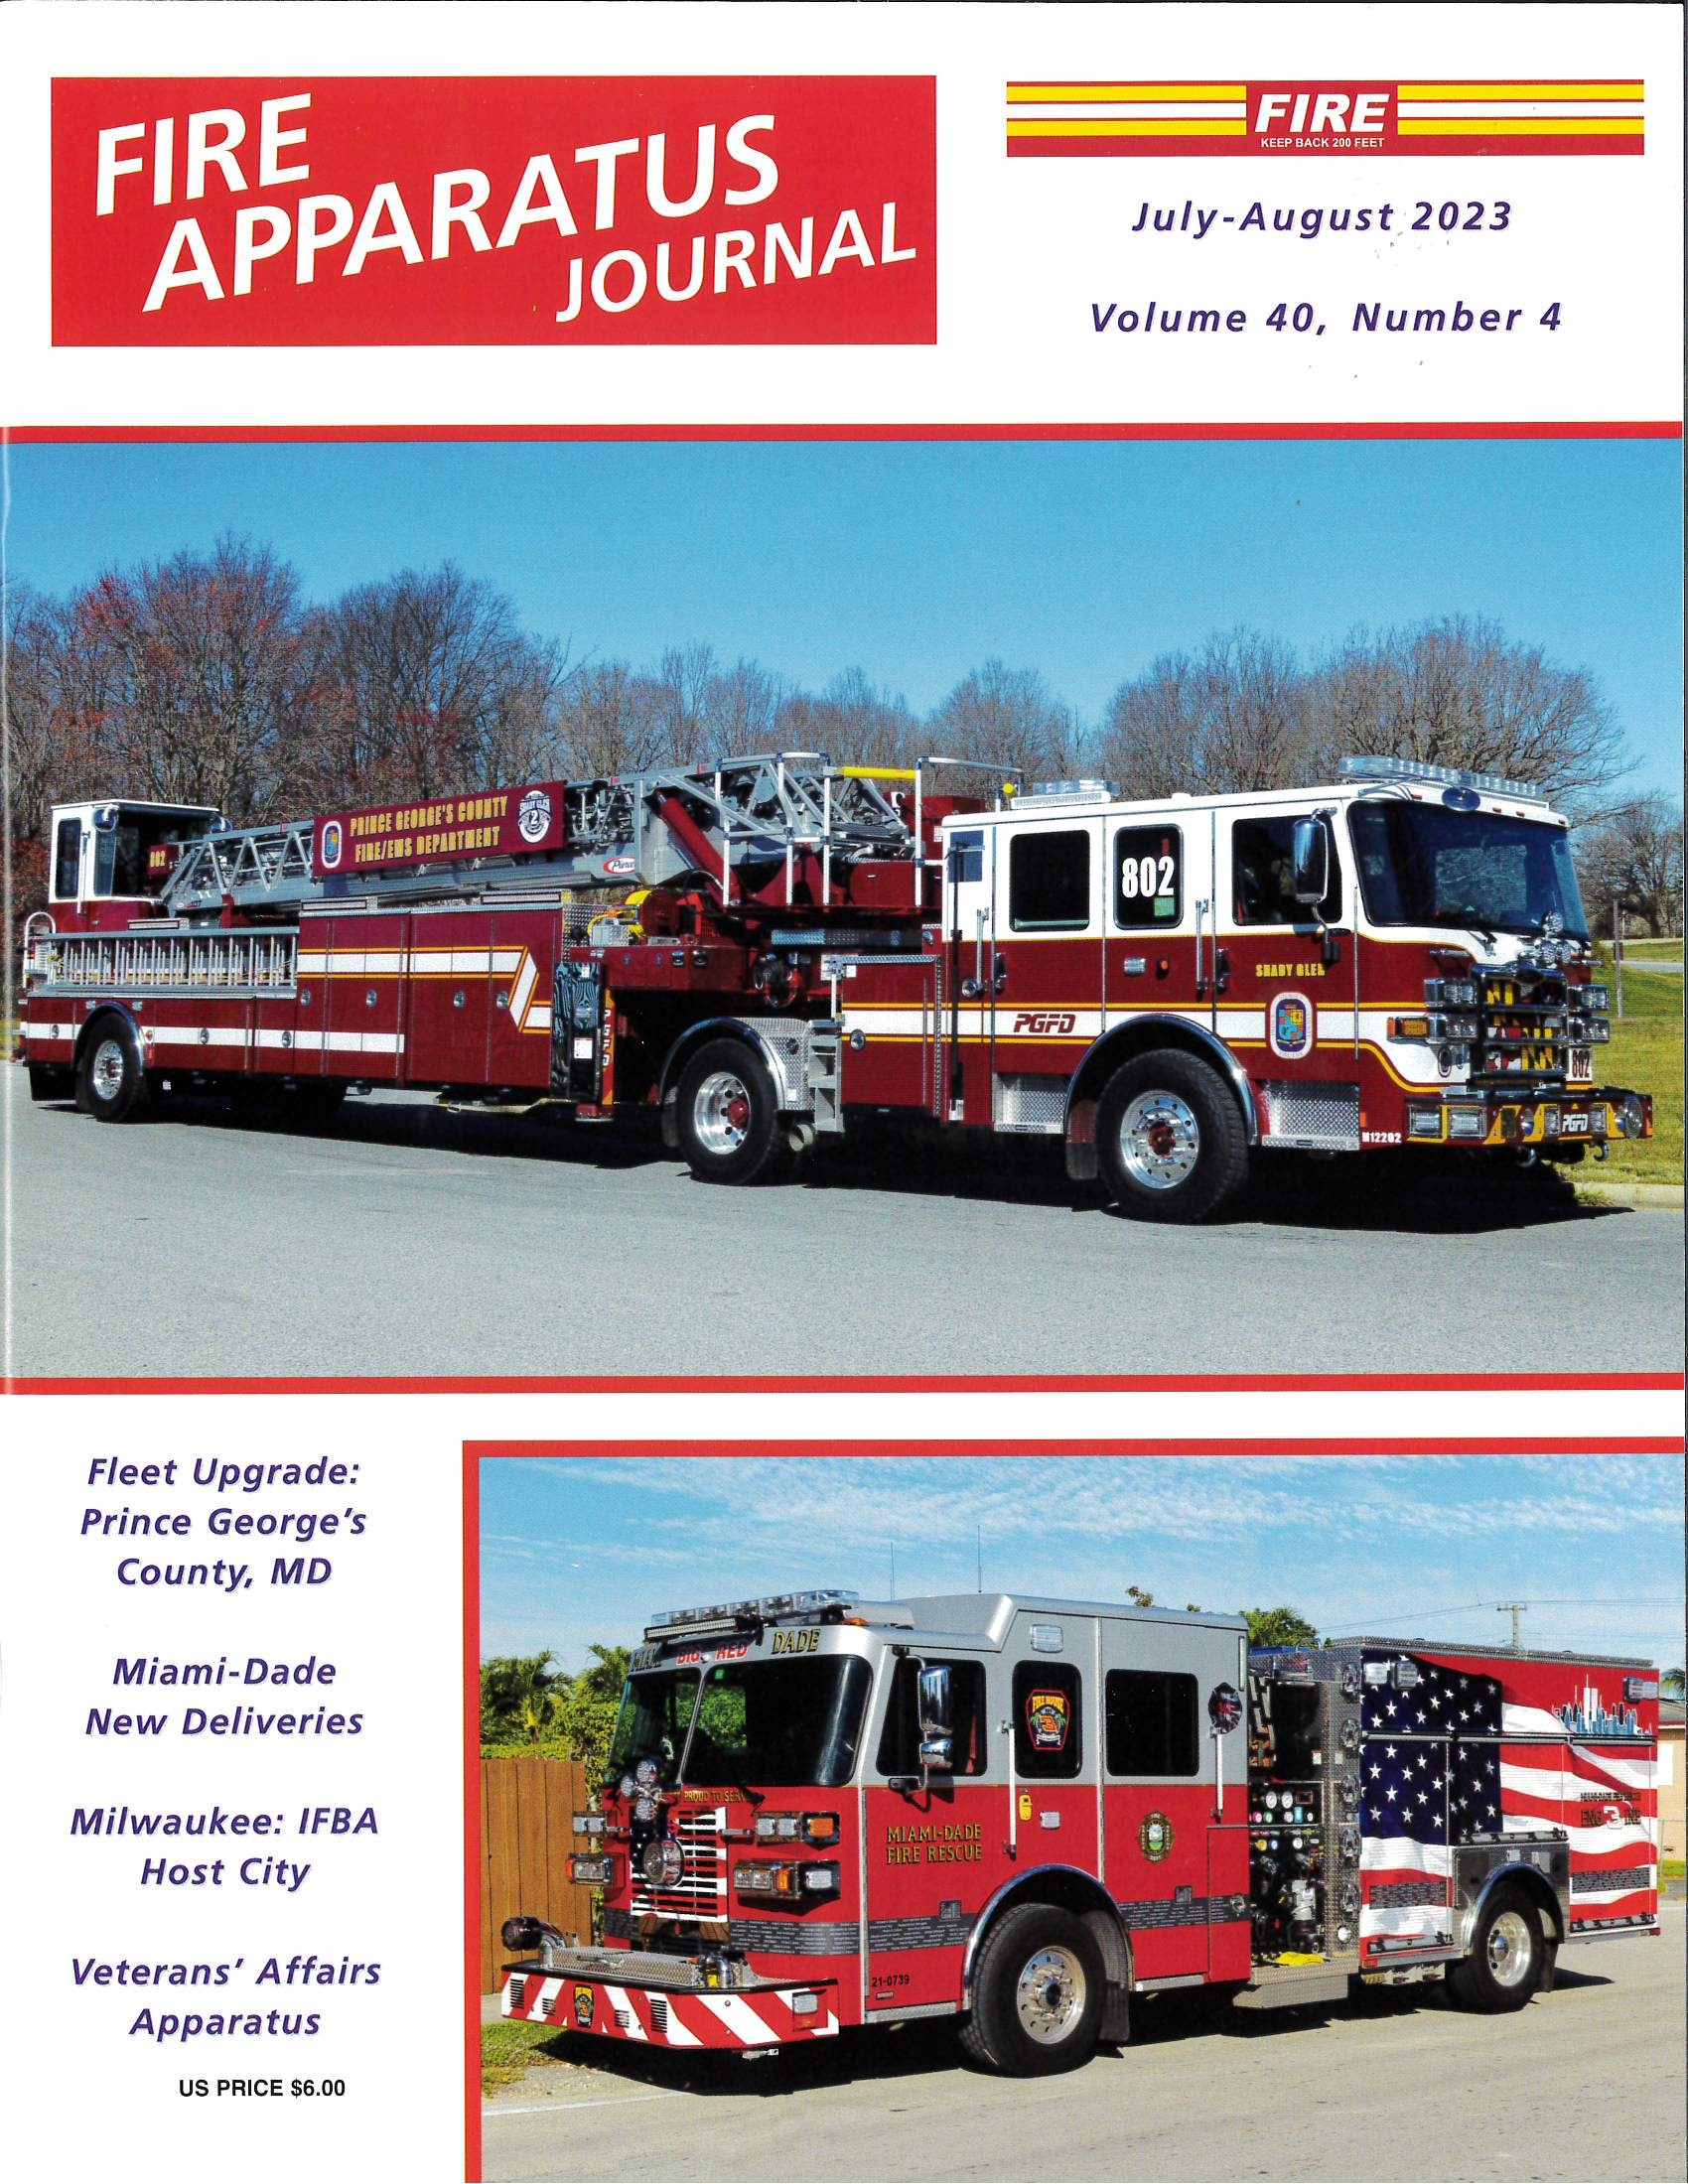 Fire Apparatus Journal, July-August 2023